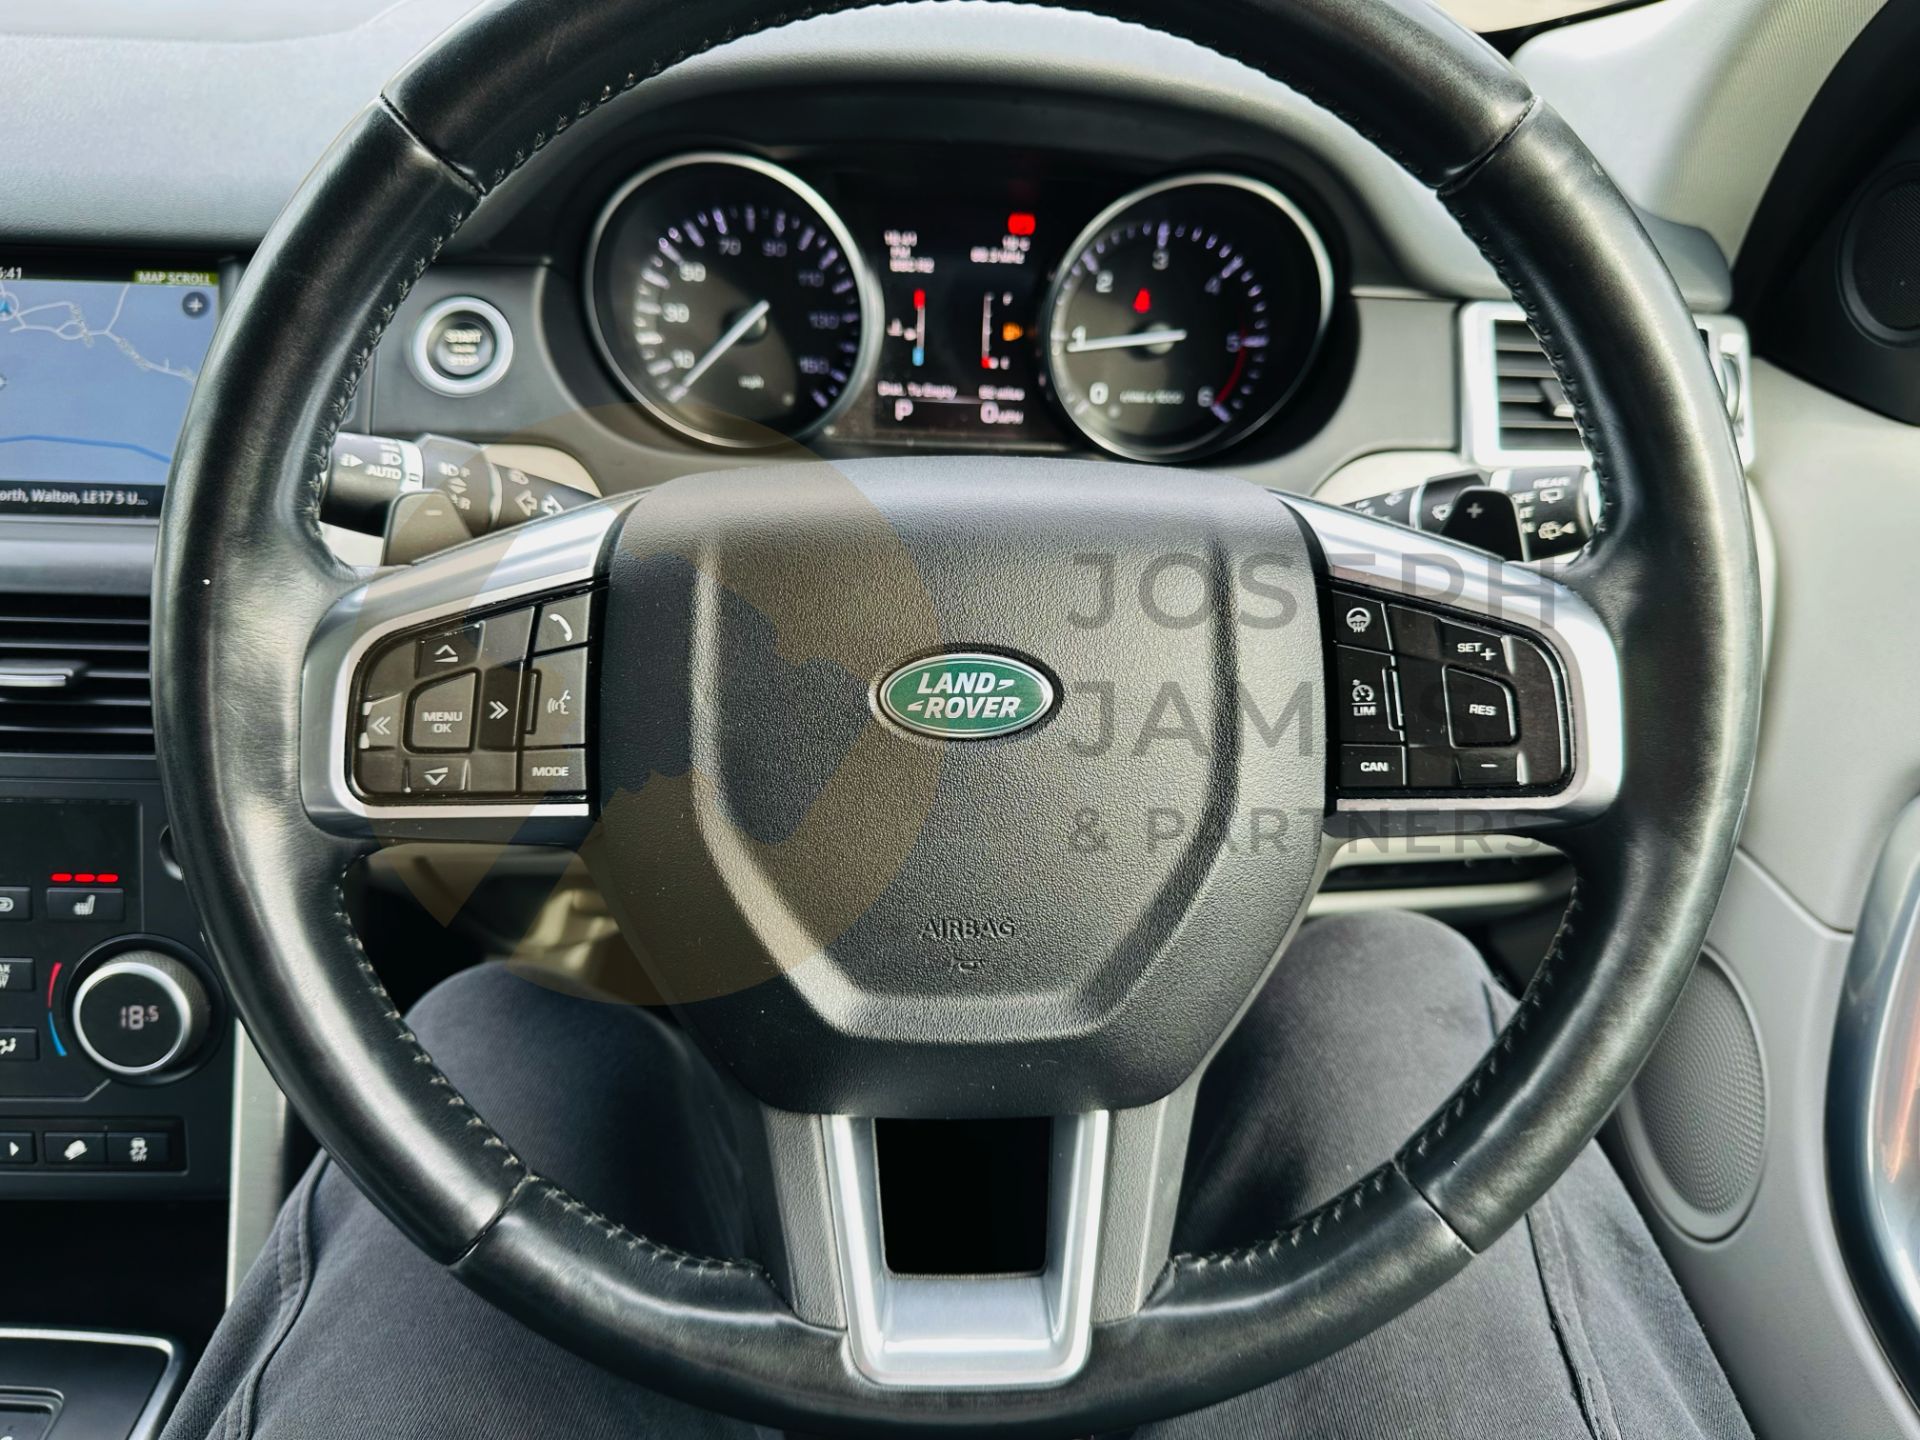 (ON SALE) LAND ROVER DISCOVERY SPORT *SE TECH* 7 SEATER SUV (2016 - EURO 6) 2.0 TD4 - AUTO *NO VAT* - Image 36 of 41